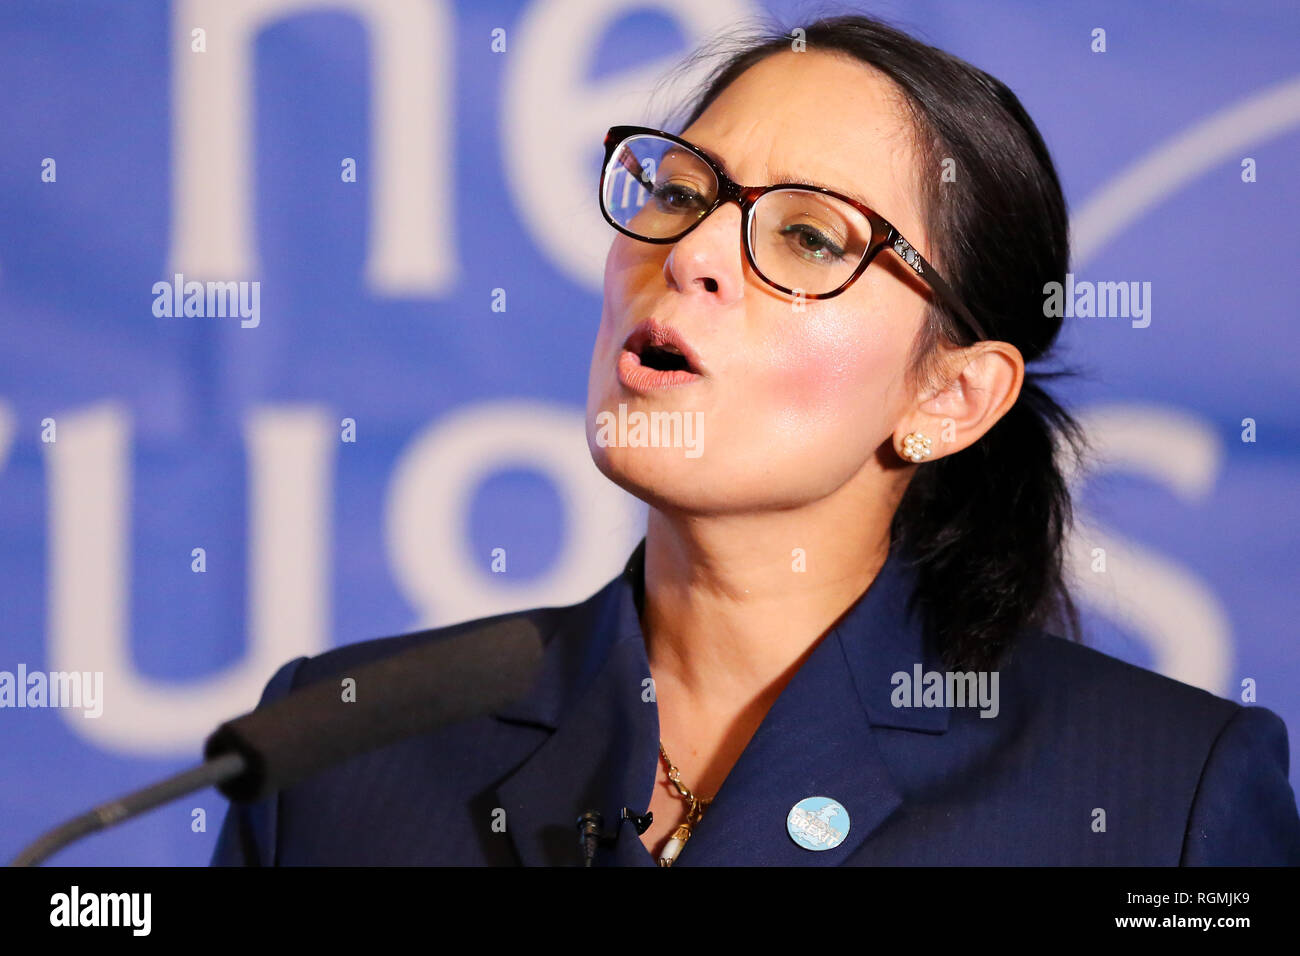 London, UK. 30th Jan, 2019. Priti Patel MP, former Secretary of State for International Development is seen speaking at the Bruges Group event focusing on issues of Britain outside the European Union. Credit: SOPA Images Limited/Alamy Live News Stock Photo